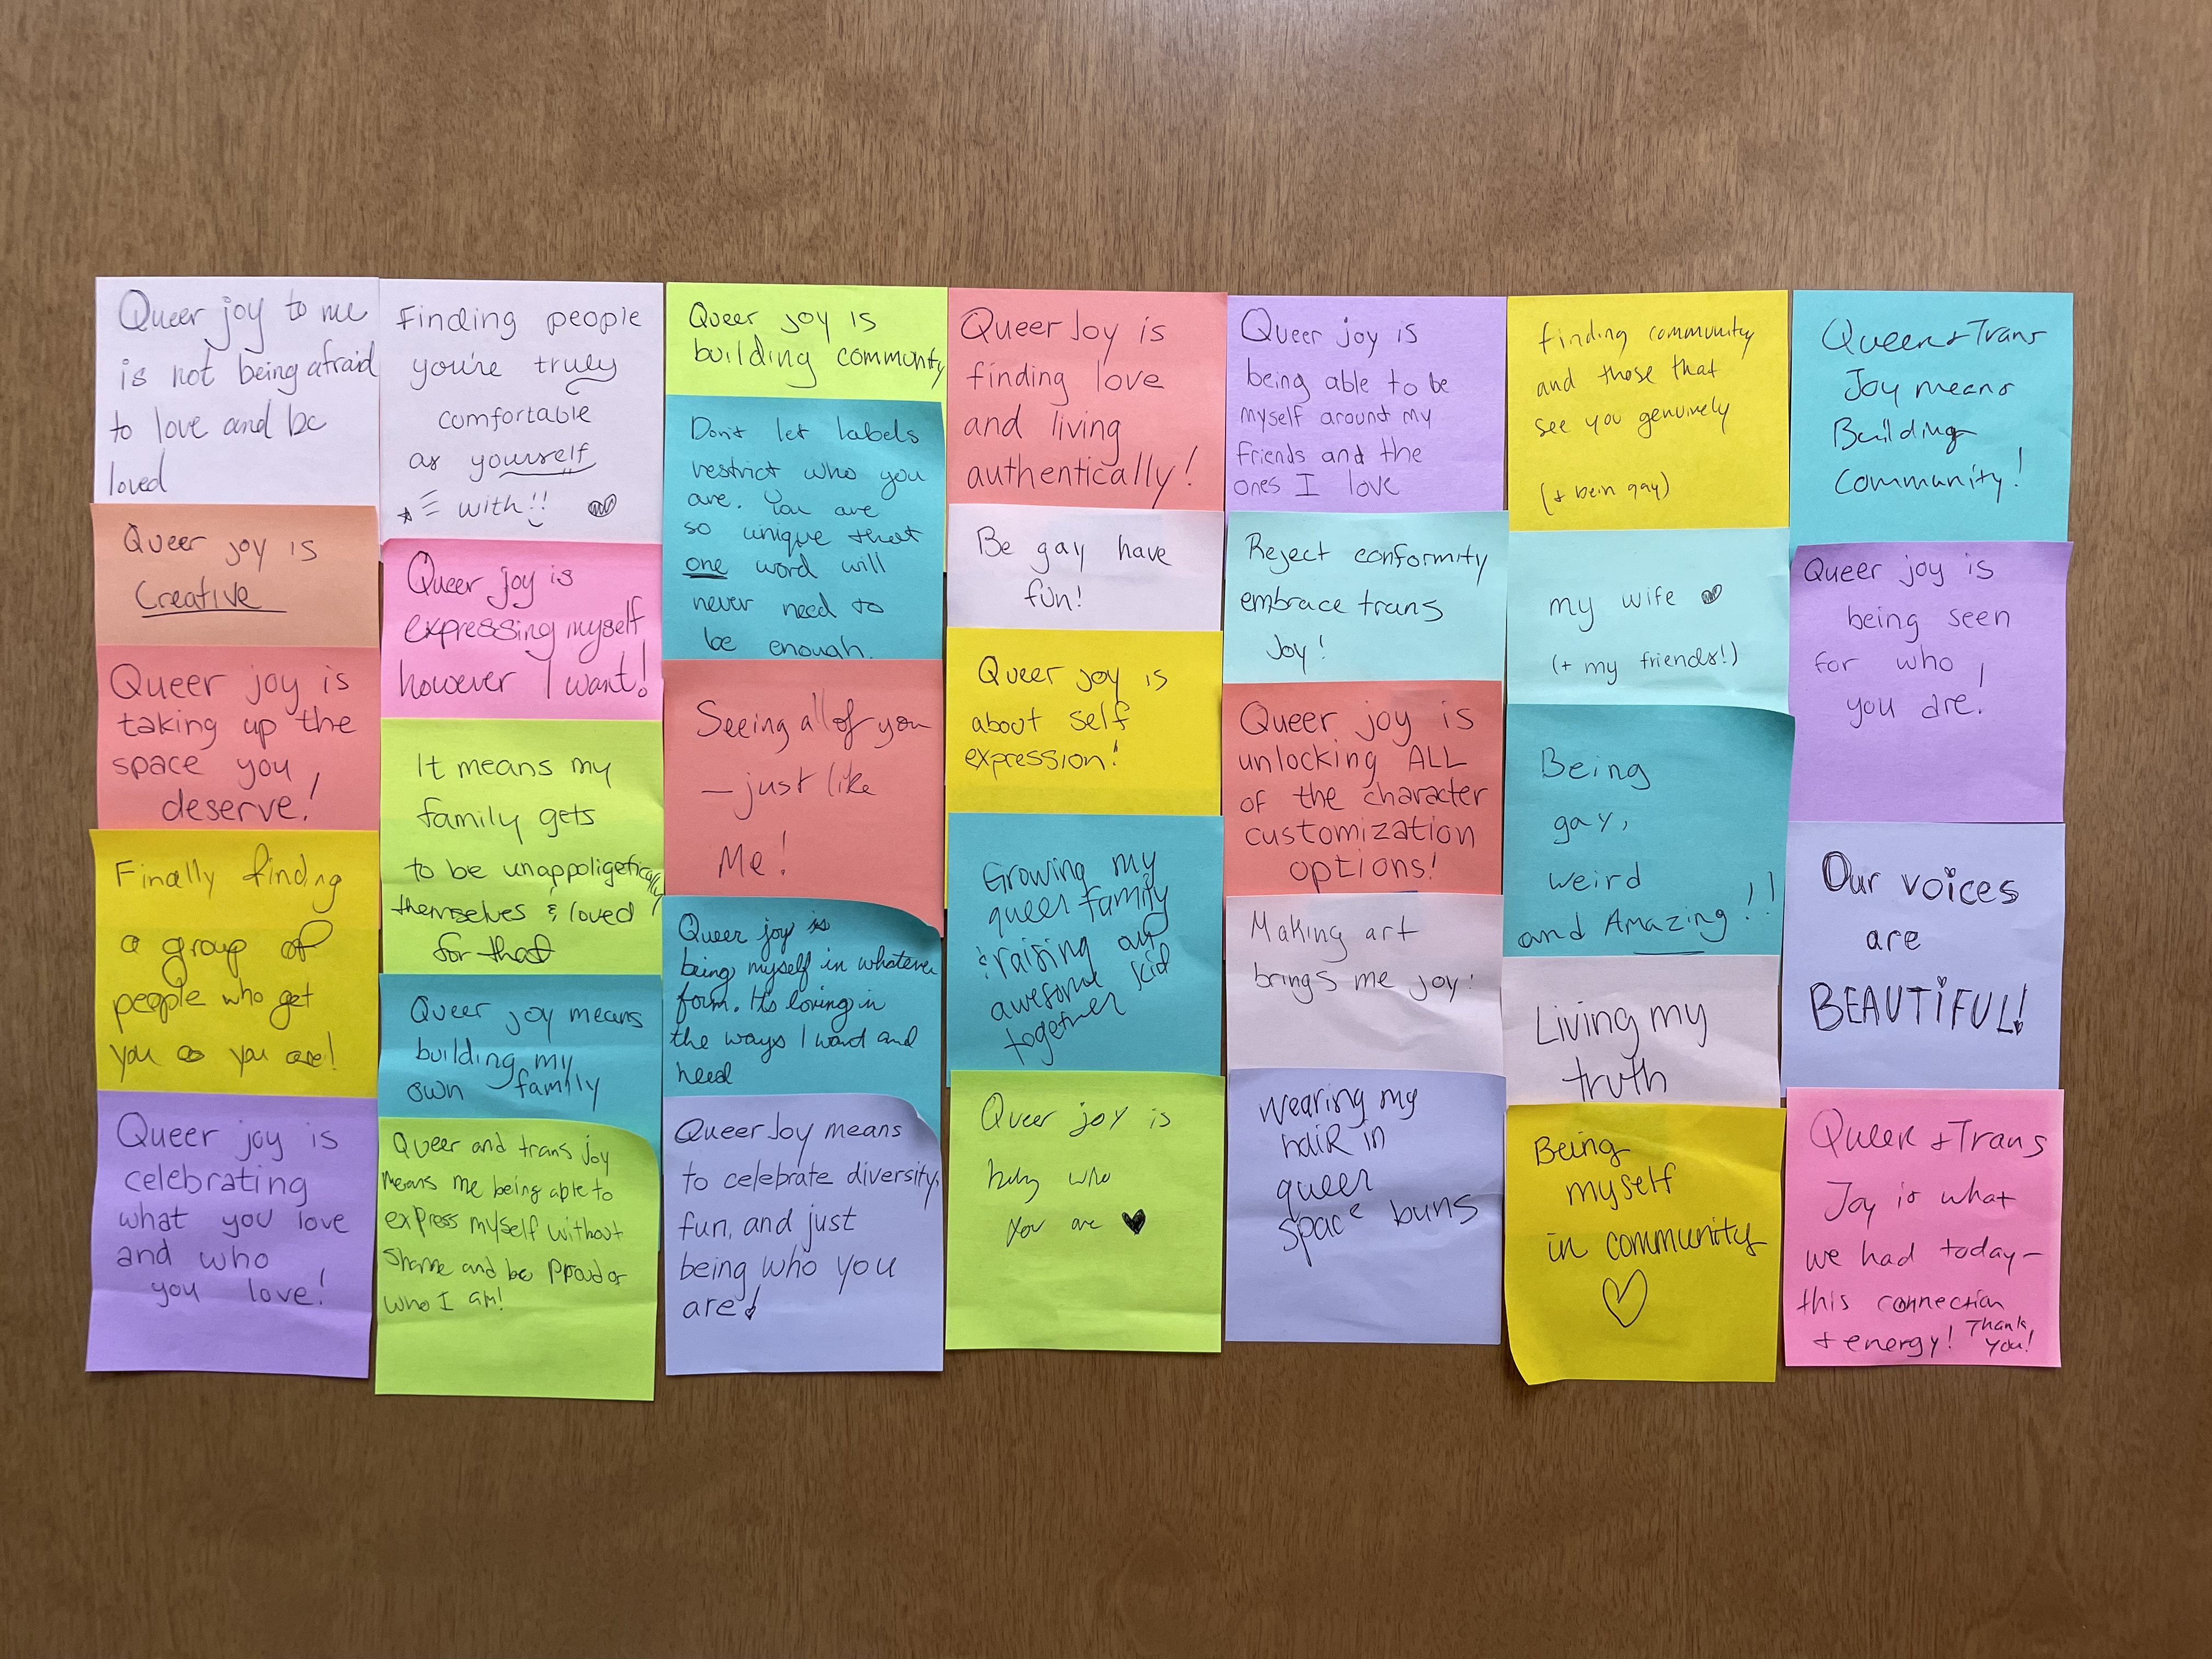 Attendees of the 'Queer and Trans Joy Celebration' event spread support and encouragement by sharing what queer and trans joy means to them.